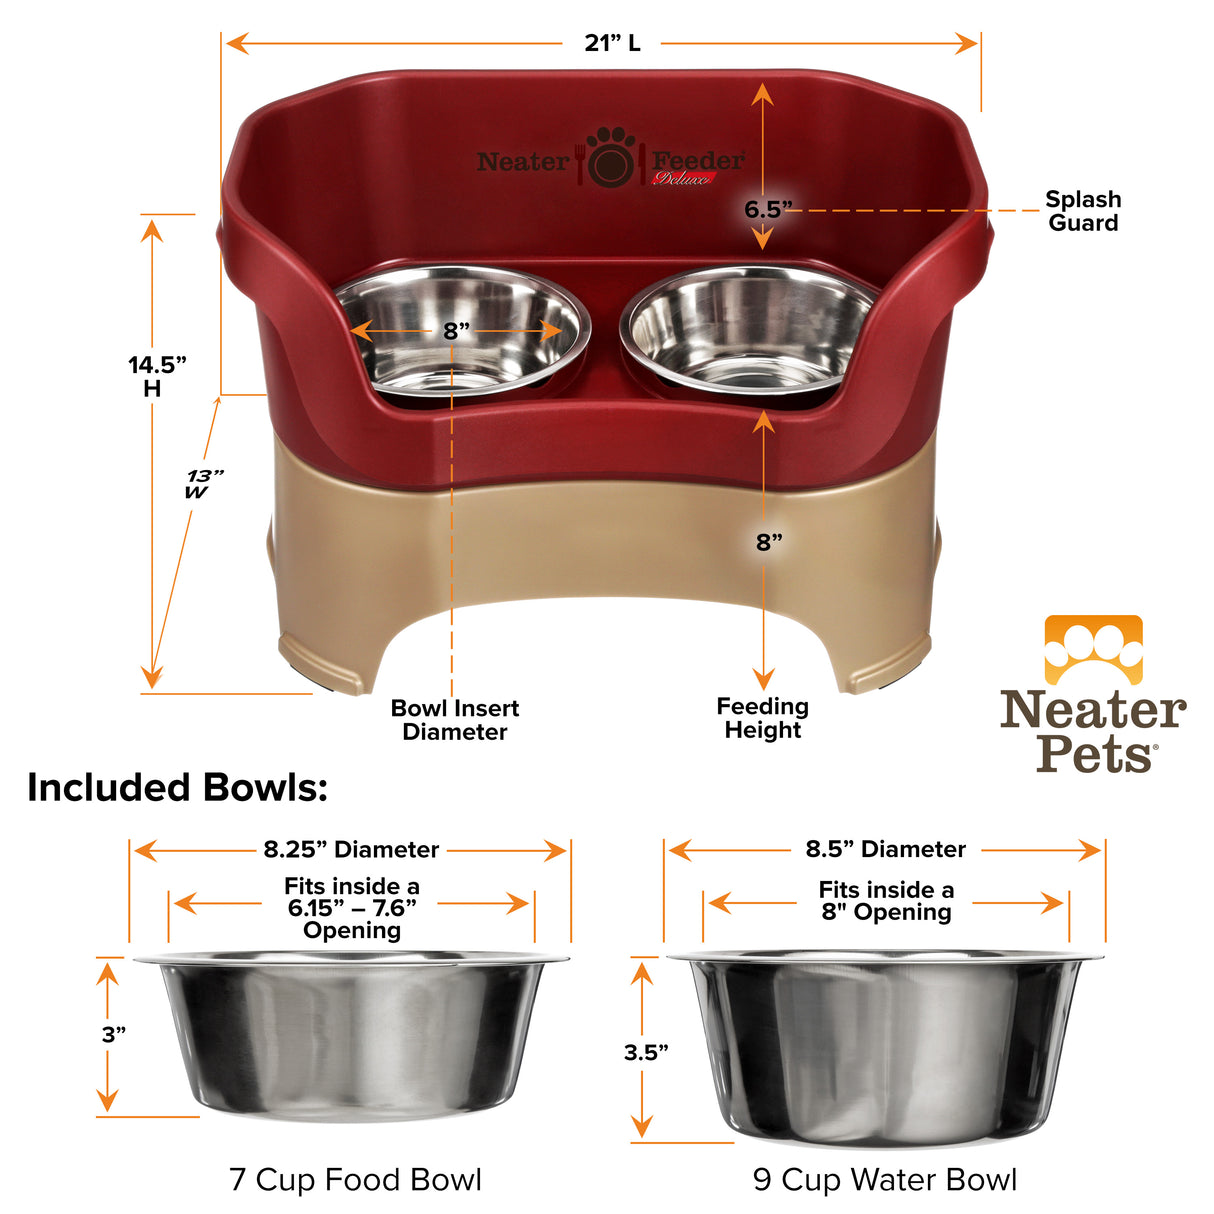 Deluxe Cranberry Large Dog Neater Feeder and Bowl dimensions